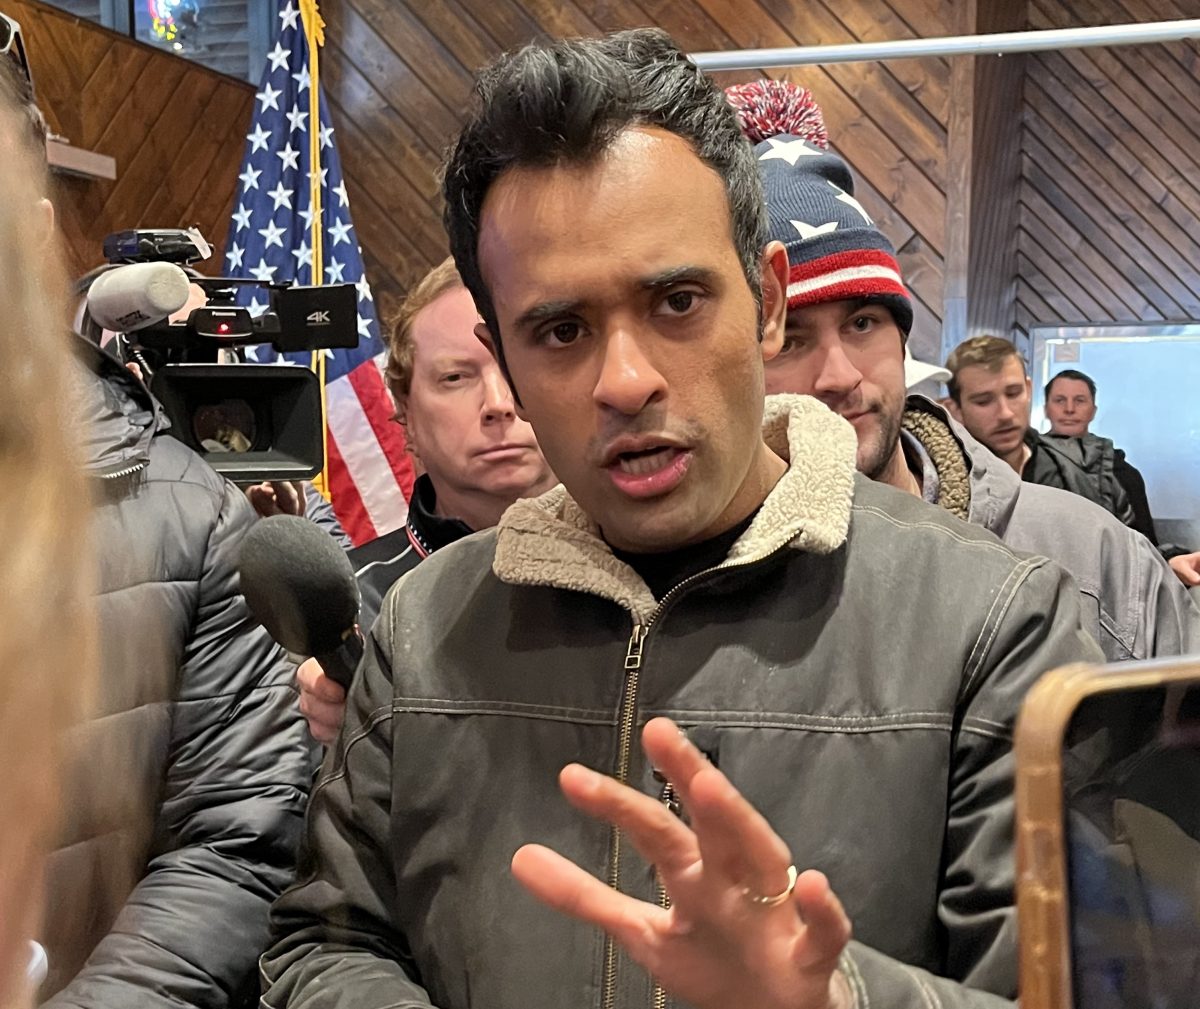 Republican candidate Vivek Ramaswamy answers questions from reporters following a rally in Ames, Iowa Jan. 14. He announced he would drop his presidential bid and endorse former President Donald Trump after placing fourth at the Iowa caucus Jan. 15.